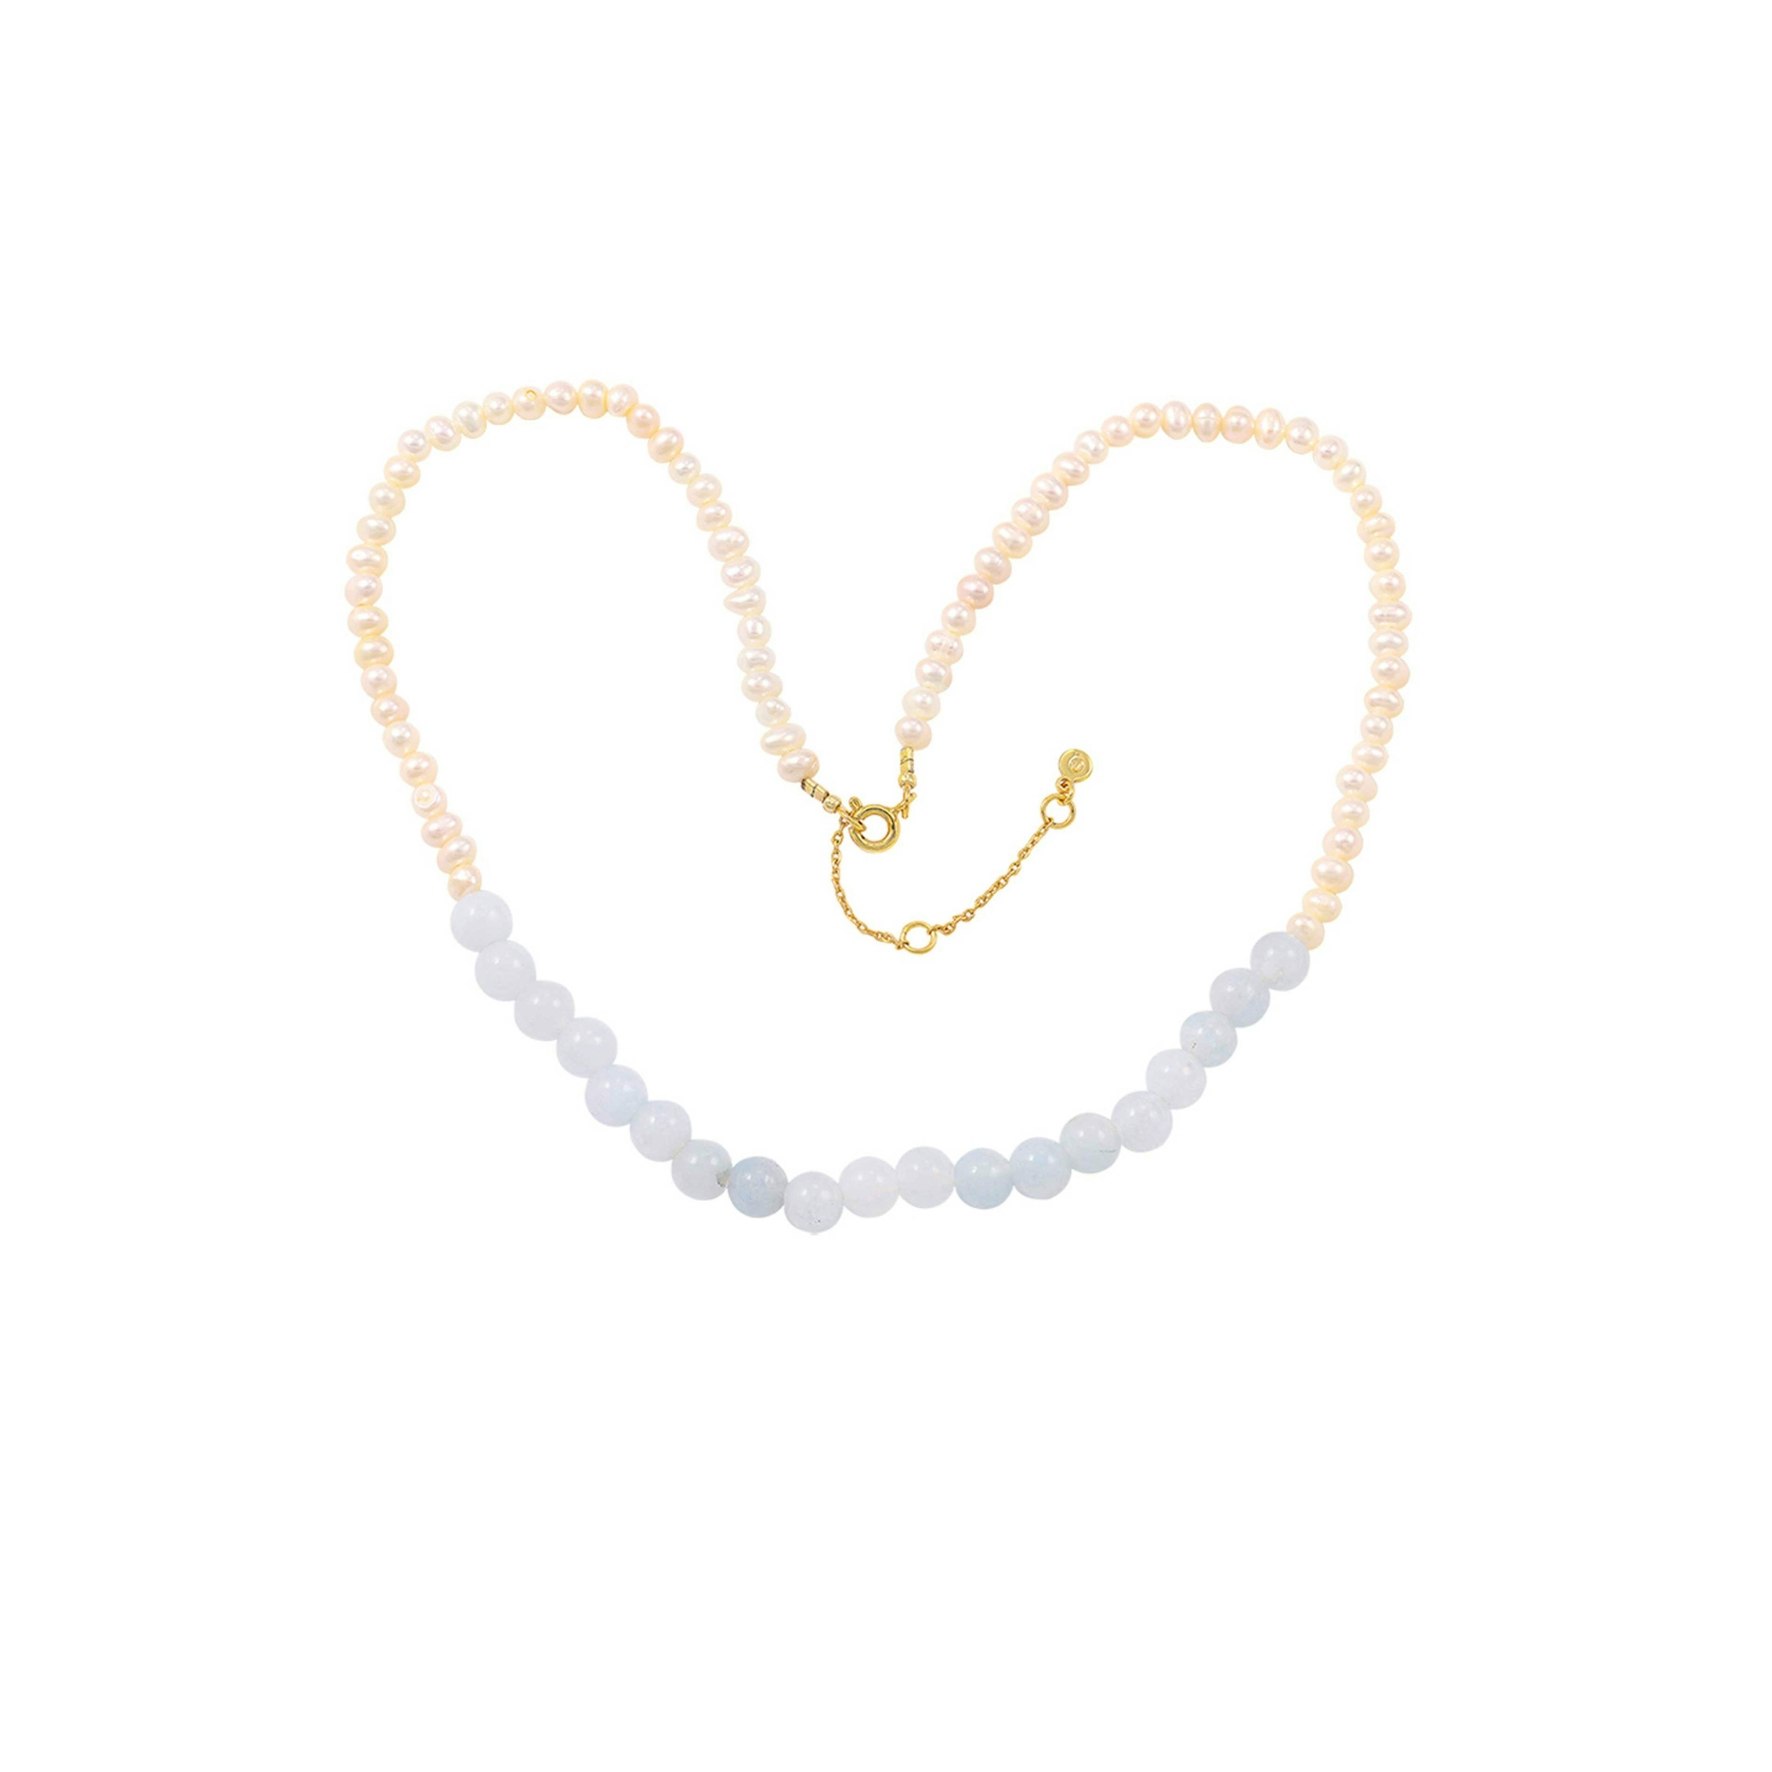 Evelyn Pearl Necklace from Hultquist Copenhagen in Goldplated Silver Sterling 925